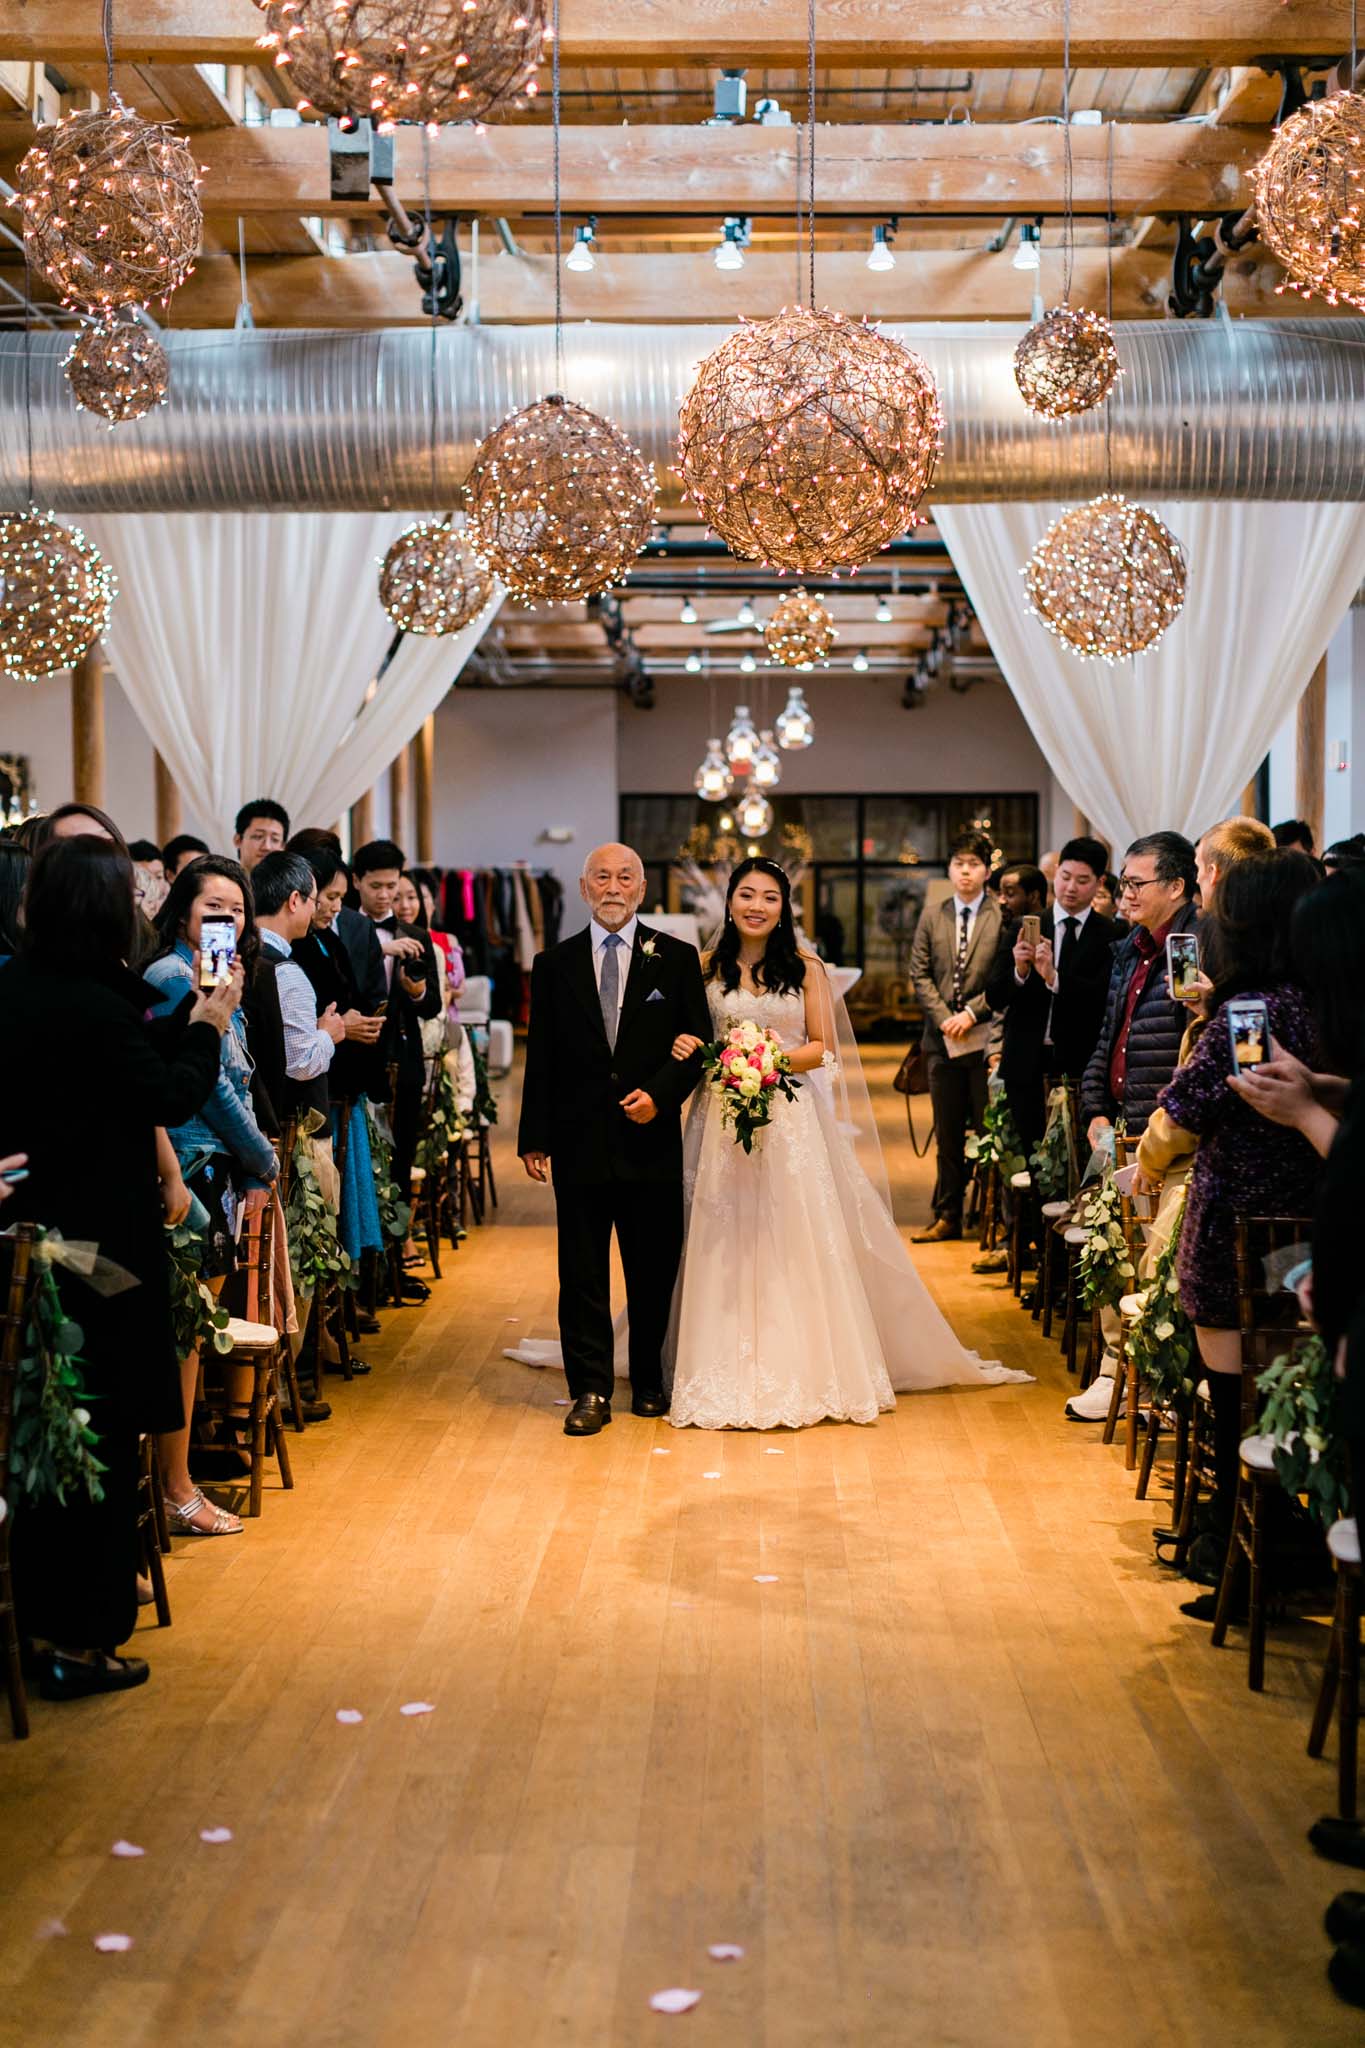 Bride walking down aisle at The Cotton Room | Durham Wedding Photographer | By G. Lin Photography